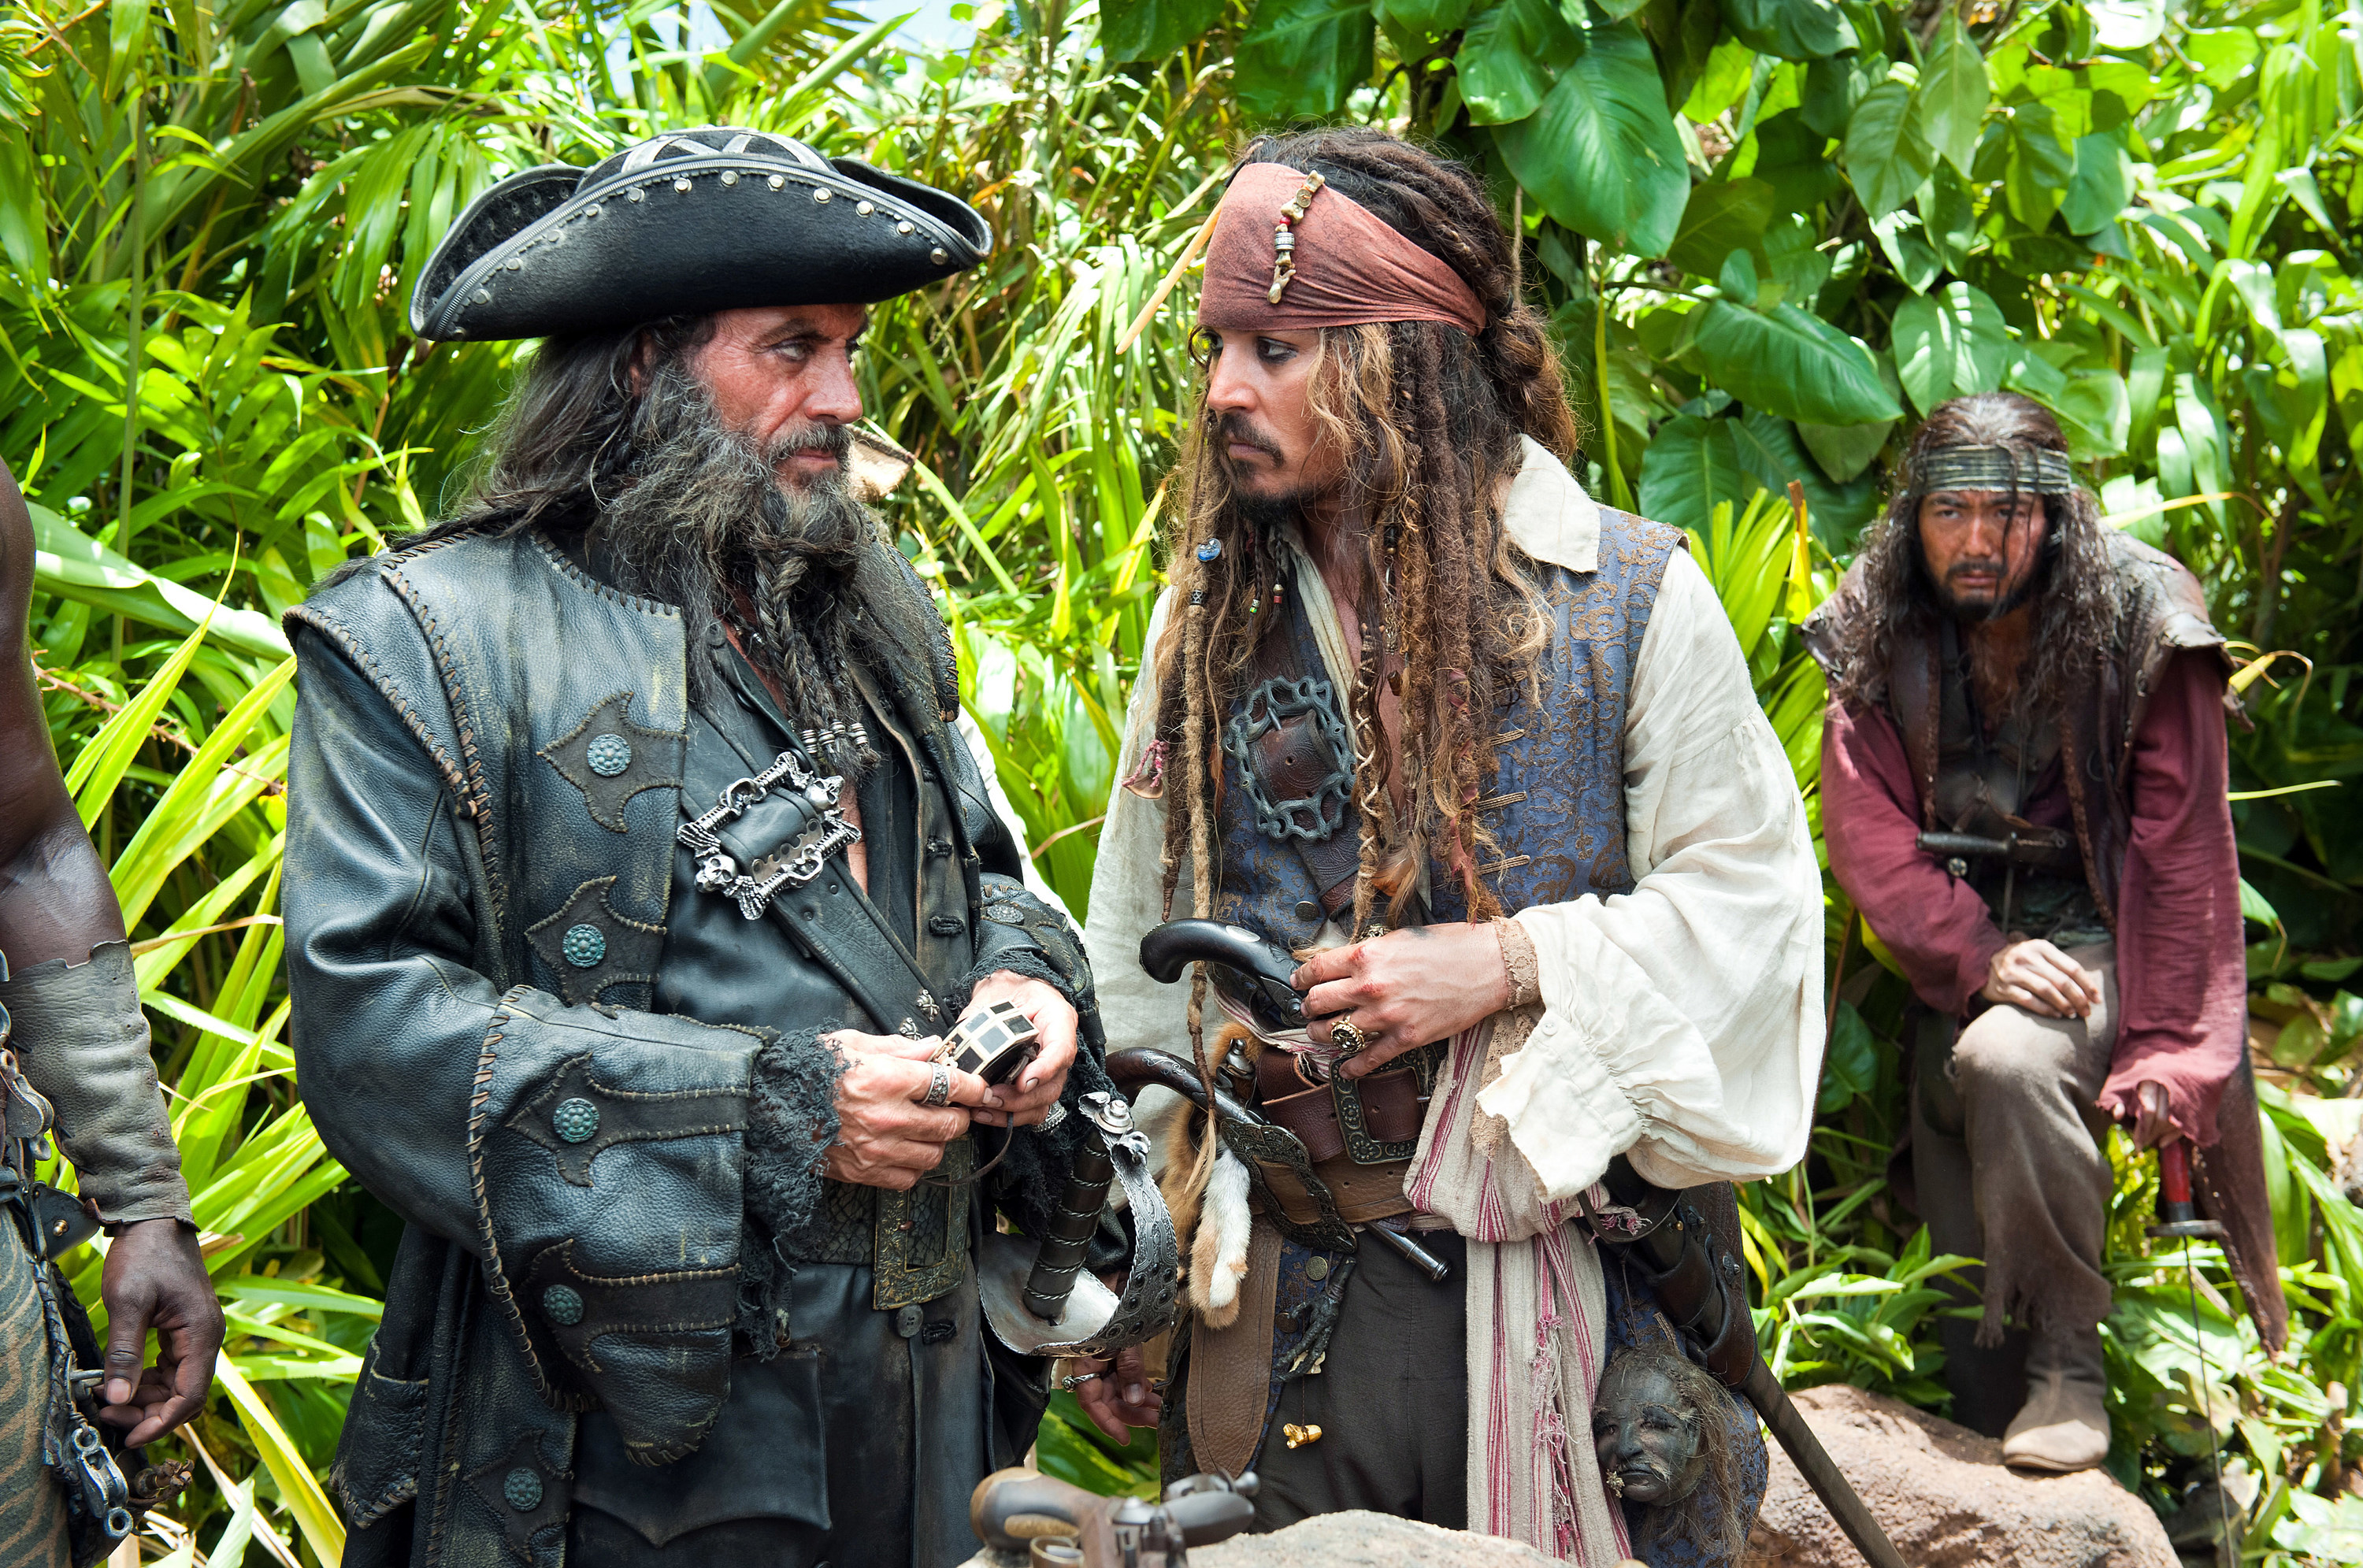 Ian McShane and Johnny Depp in “Pirates of the Caribbean: On Stranger Tides”